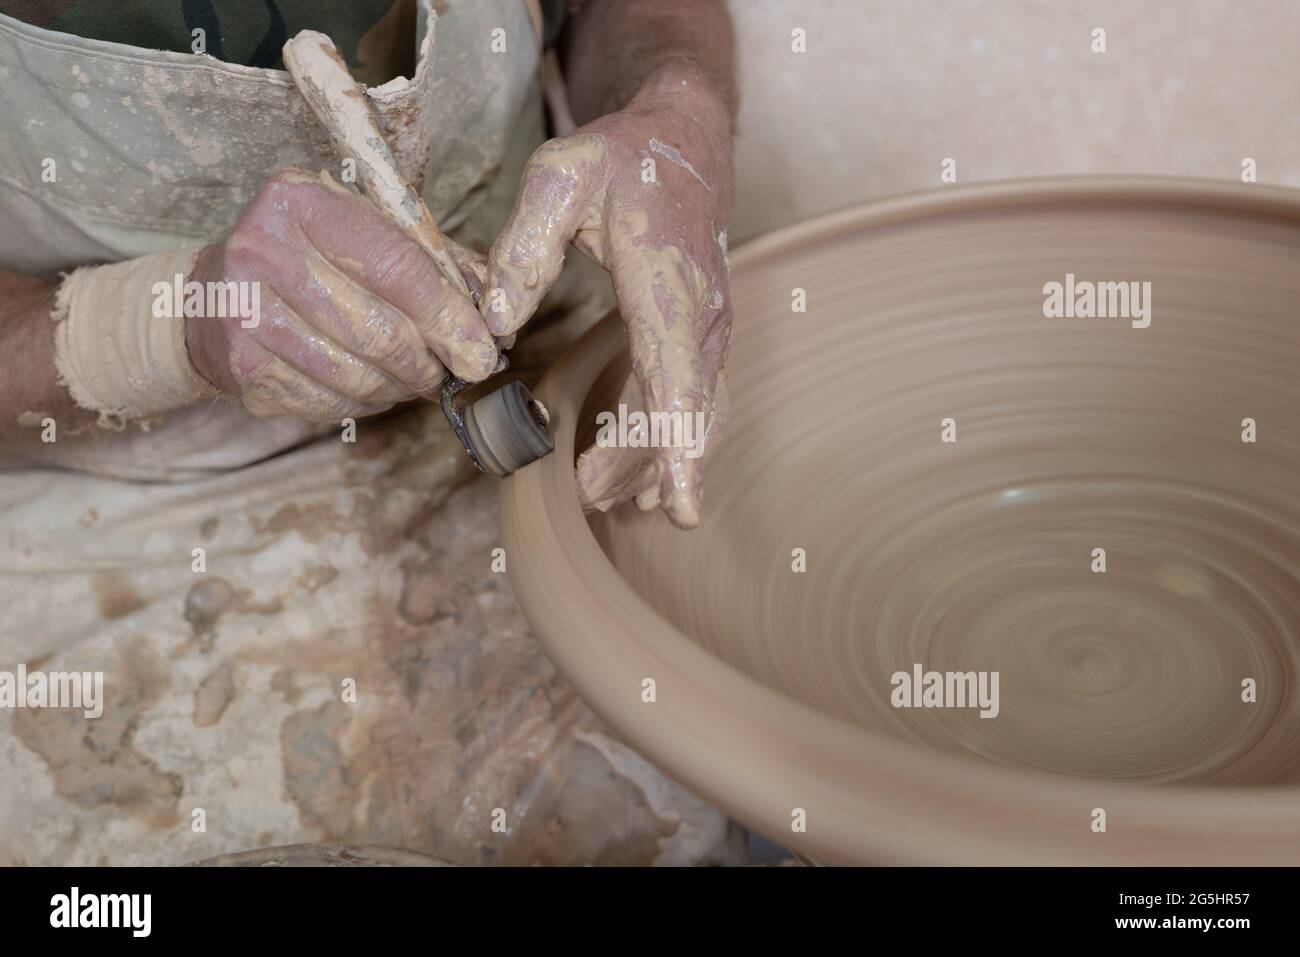 Potter working softly on pot with tools Stock Photo